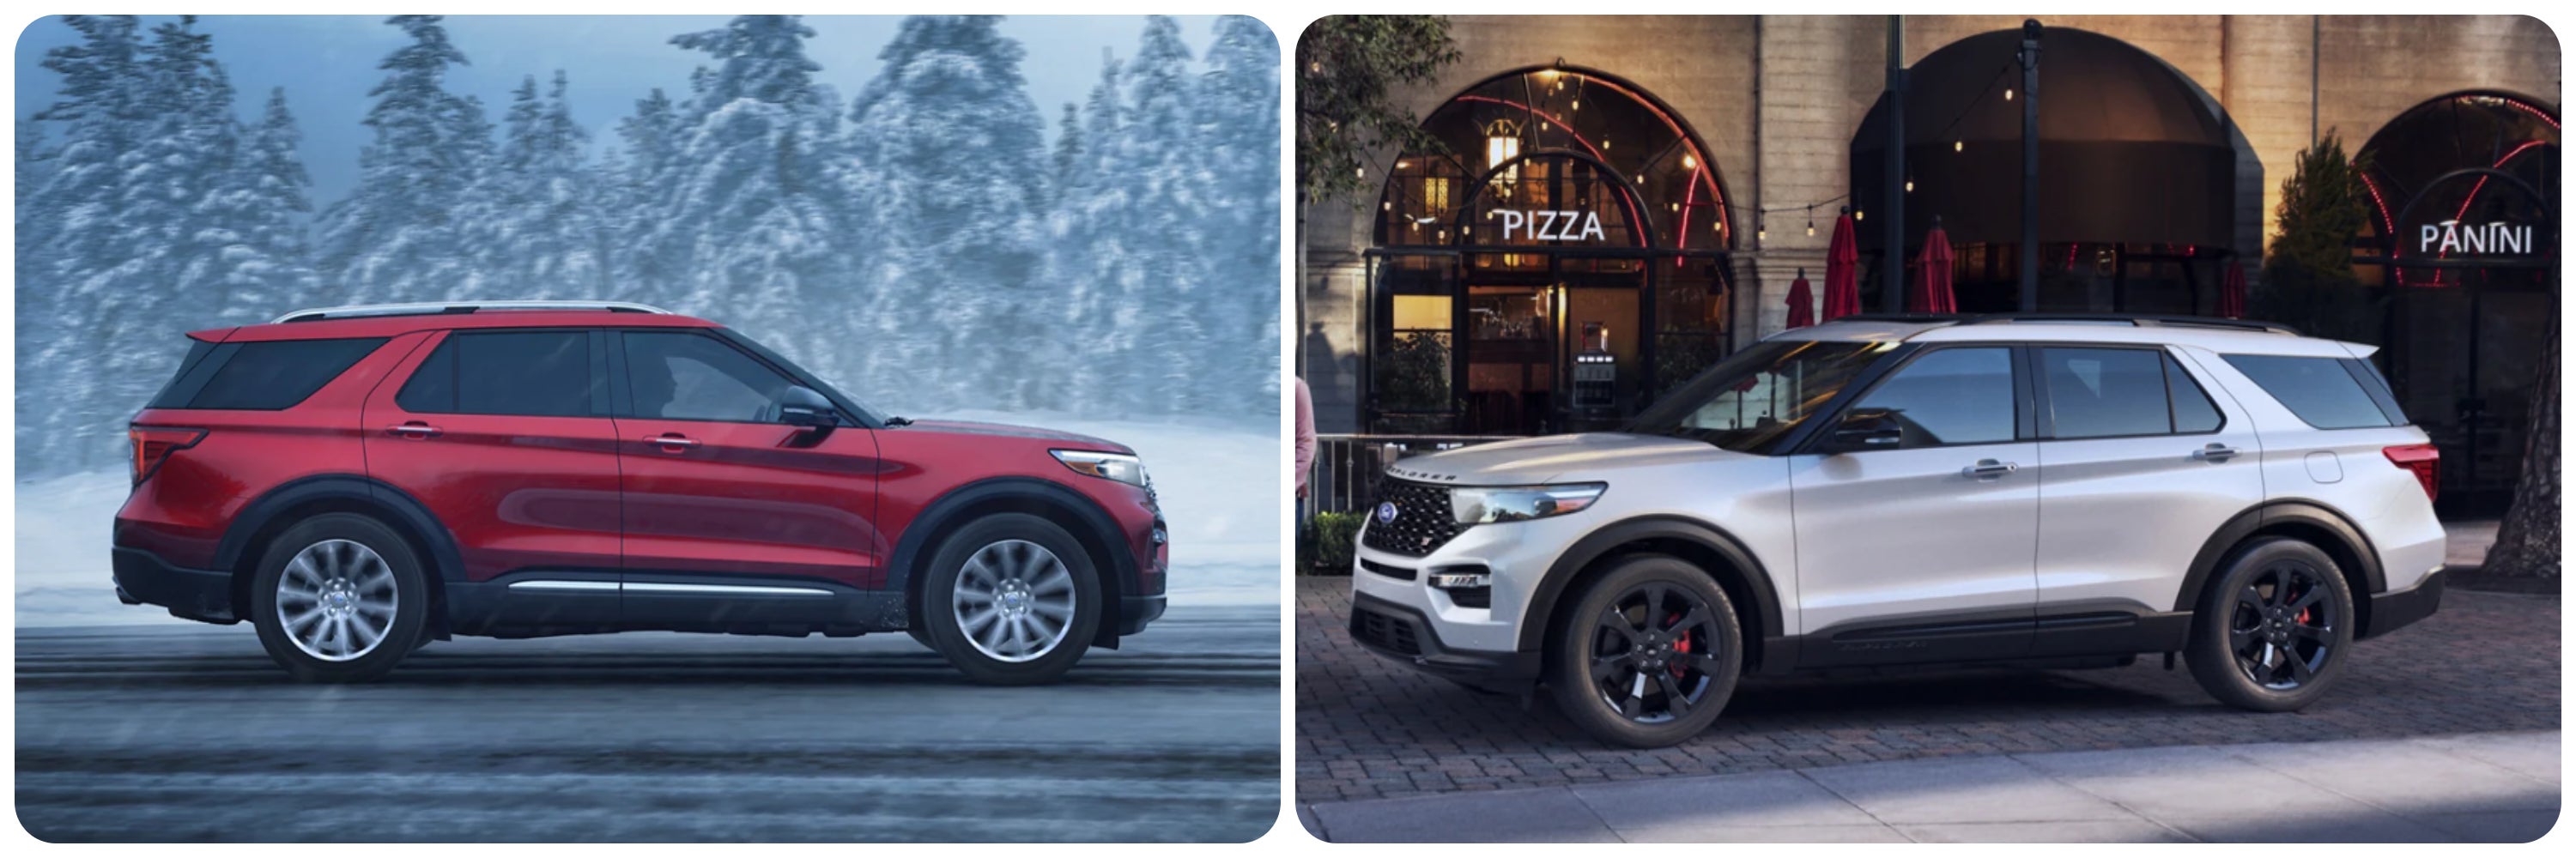 On the left a profile view of a red 2023 Ford Explorer and on the right a profile view of a silver 2022 Ford Explorer